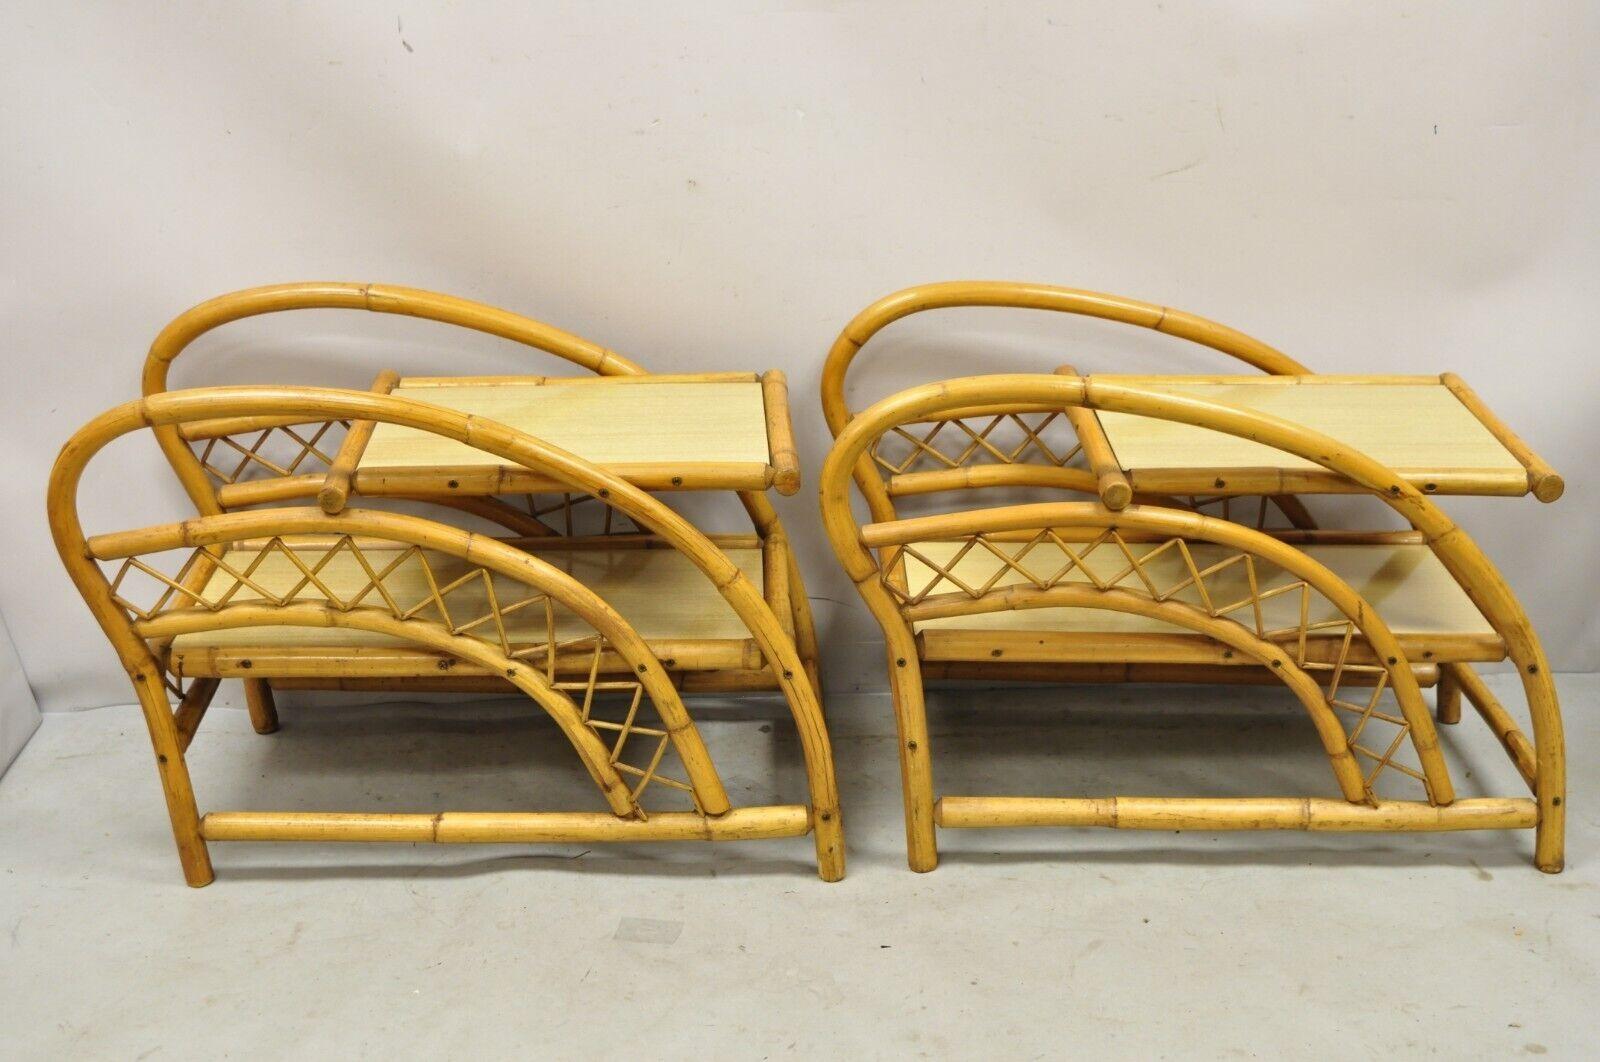 Vintage Tiki Rattan Bentwood Bamboo 2 Tier Scultpural End Tables - a Pair. Item features (2) tier laminate surfaces, shapely bentwood bamboo frames, very nice vintage pair, sleek sculptural form. Circa Mid 20th Century.
Measurements: 
Overall: 24